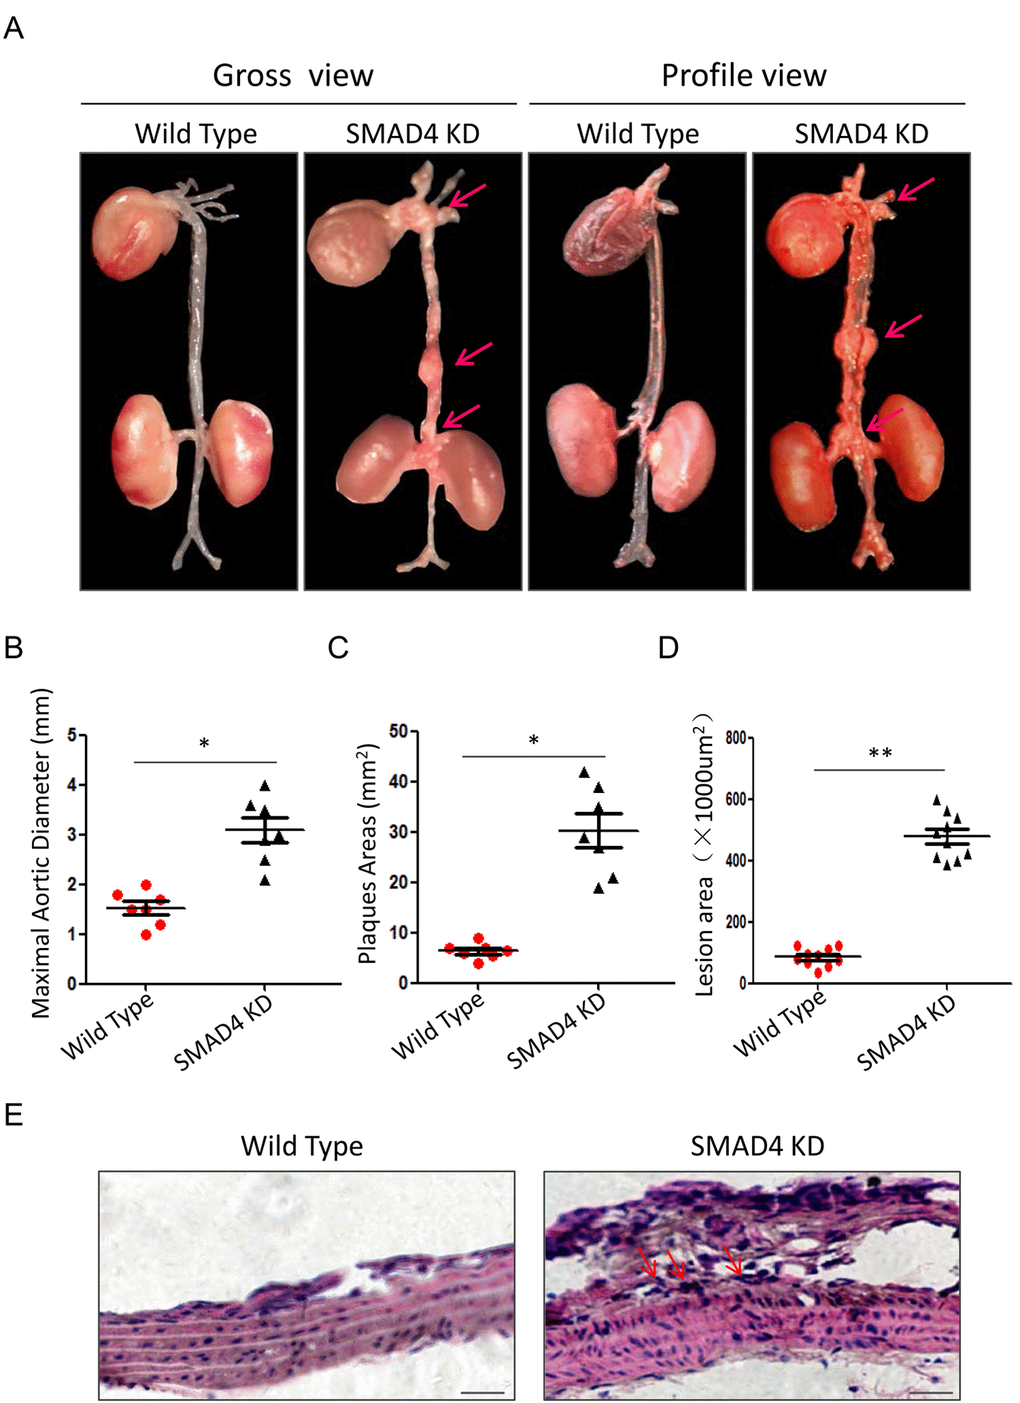 Repression of SMAD4 promotes the formation of TAAD. (A) The gross view and profile view of aortas from Wild Type and SMAD4 KD mouse models. Quantitative analysis of maximal aortic diameter (B), plaques area (C) and lesion area (D) between different groups, n=5/group; (E) Representative graphs of HE staining for thoracic aortas from Wild Type and SMAD4 KD mouse models. Data are means ± SD. *PP